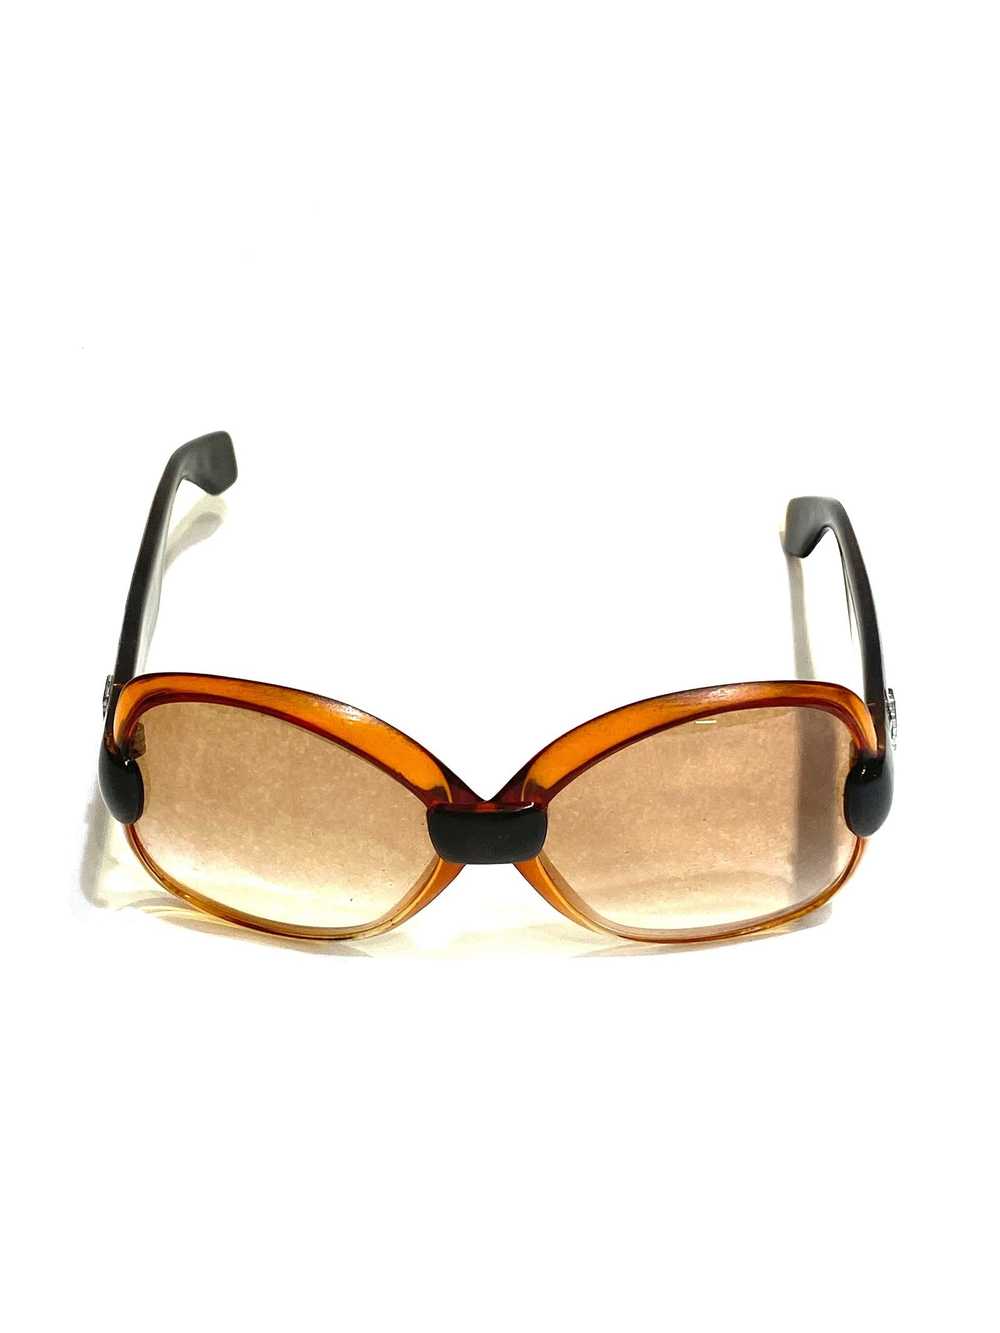 Vintage YSL Brown and Black Square Sunglasses - image 9